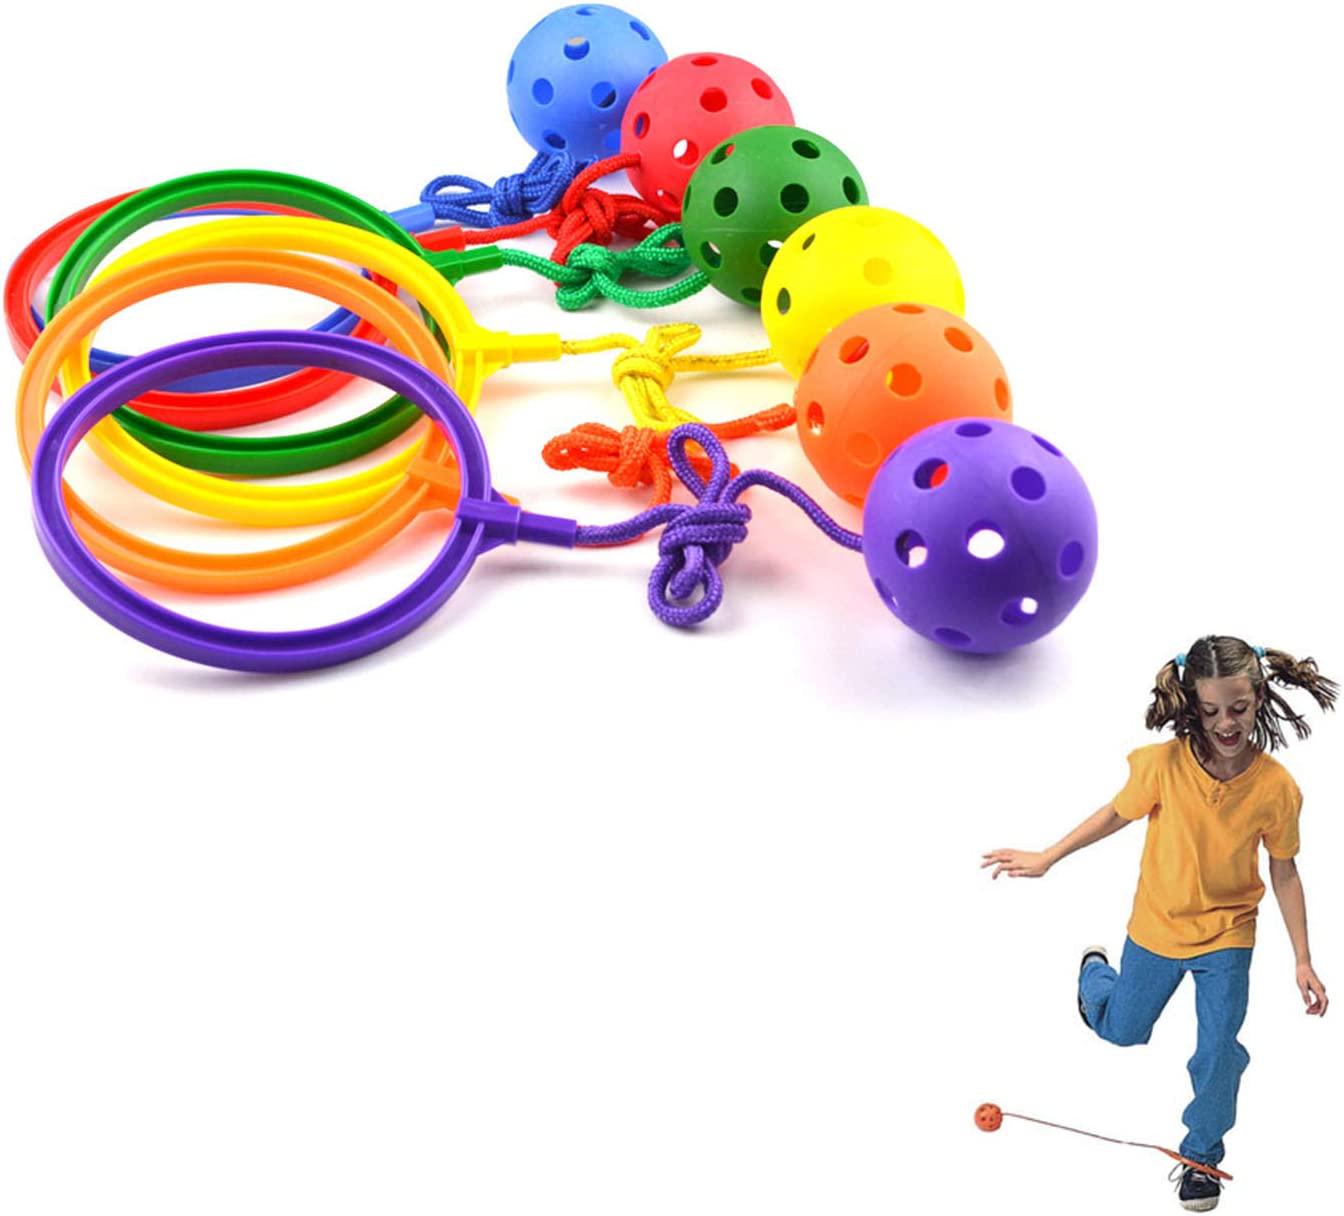 KRISMYA, KRISMYA Lemon Twist Skip Toy, 6 Pcs Variety Colors Skip Jump Rope - Skip It - Sport Swing Skip Ball Game - Play Indoor and Outdoor,Playground, Gym Class, and Home for Boys Girls and Kids